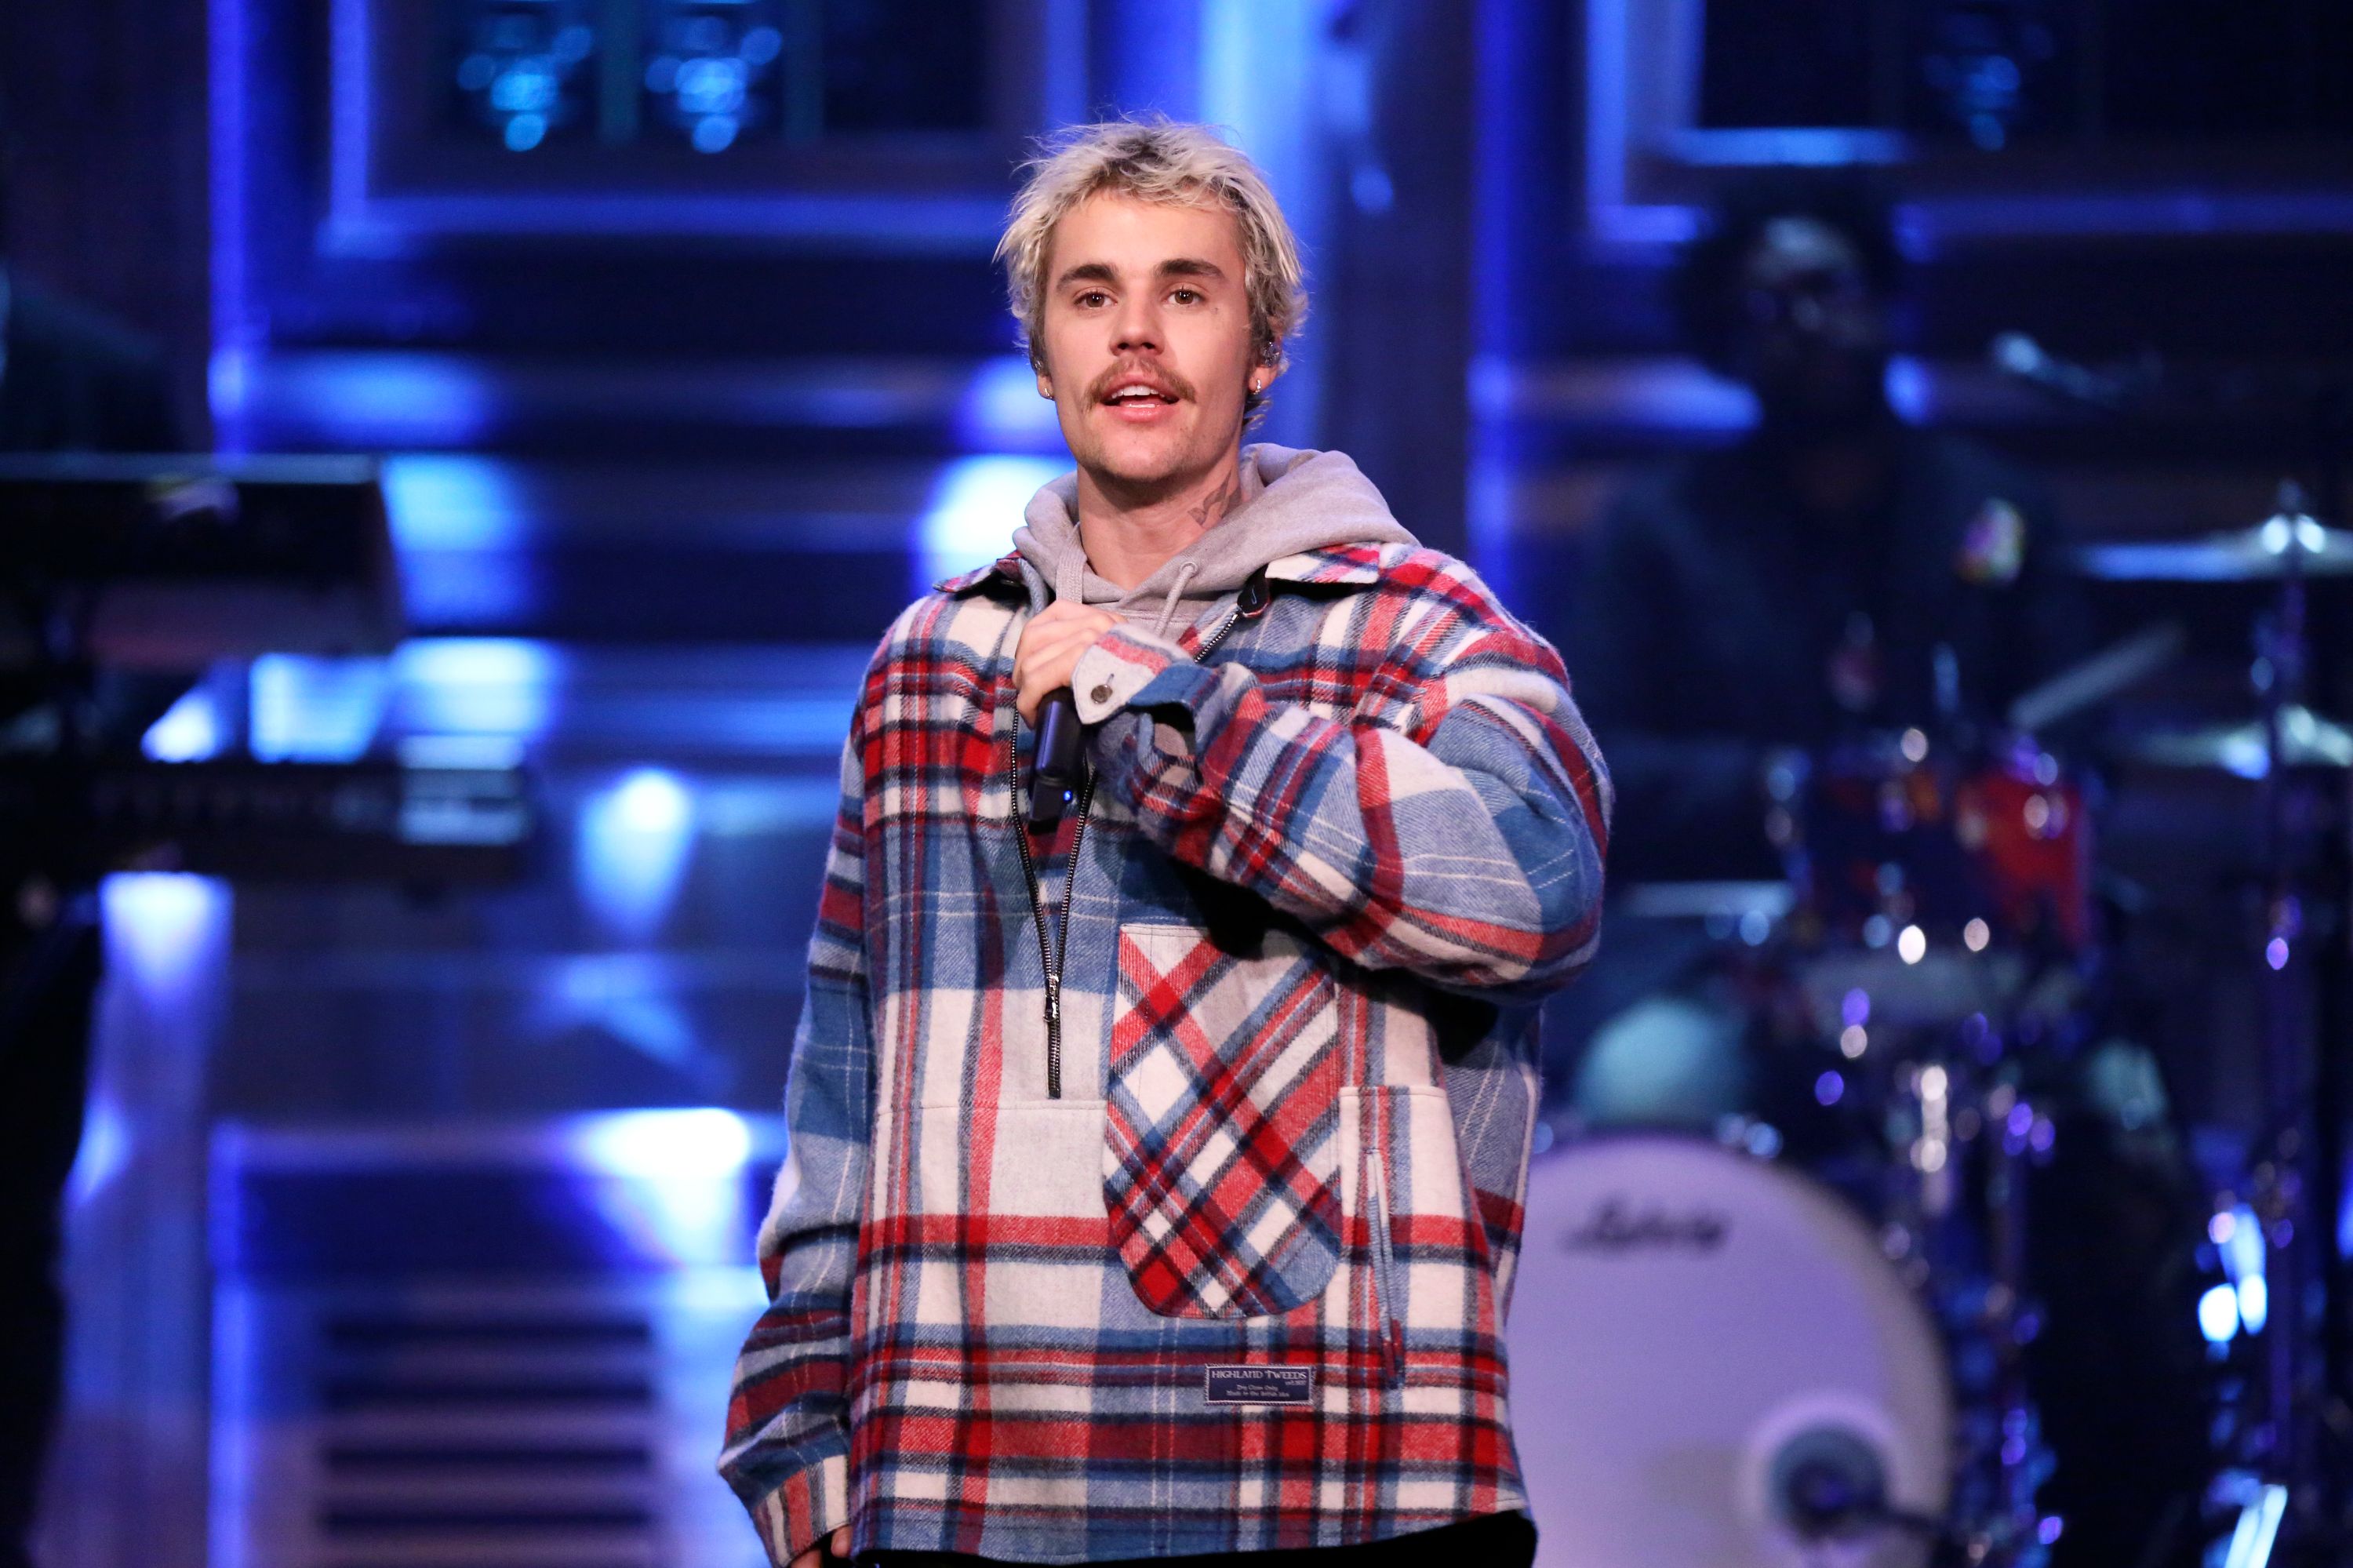 Justin Bieber at The Tonight Show Starring Jimmy Fallon - Season 7 on February 14, 2020 | Photo: Getty Images